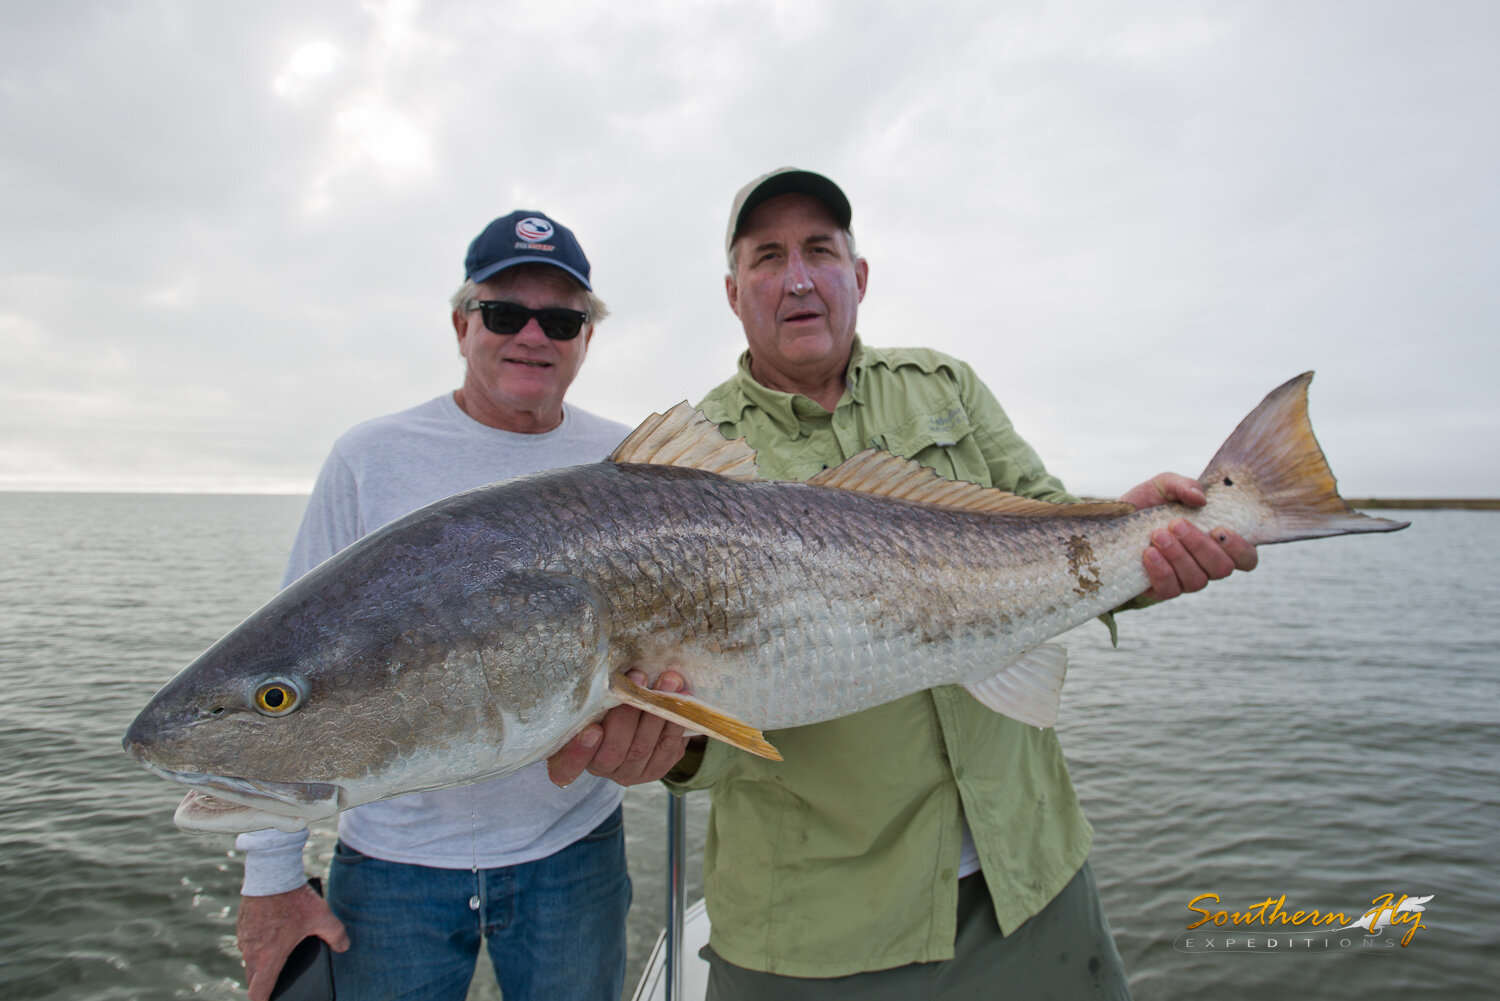 2020-01-16_SouthernFlyExpeditions_NewOrleans_RickCrivelloneAndMikePurcell-8.jpg